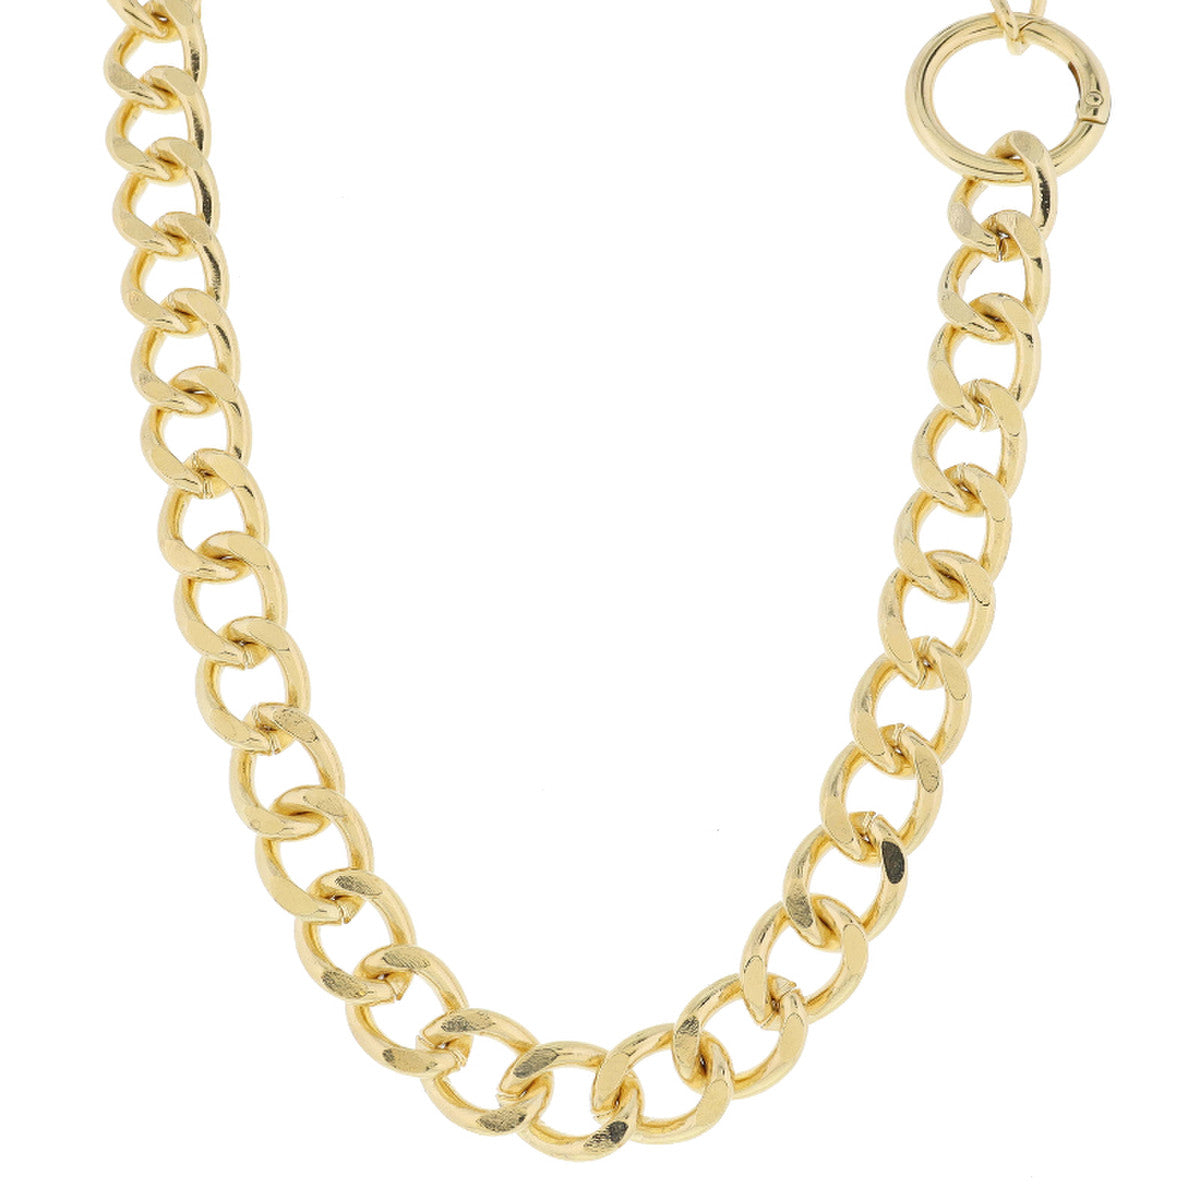 JM Chunky Gold Chain Circle Clasp Necklace